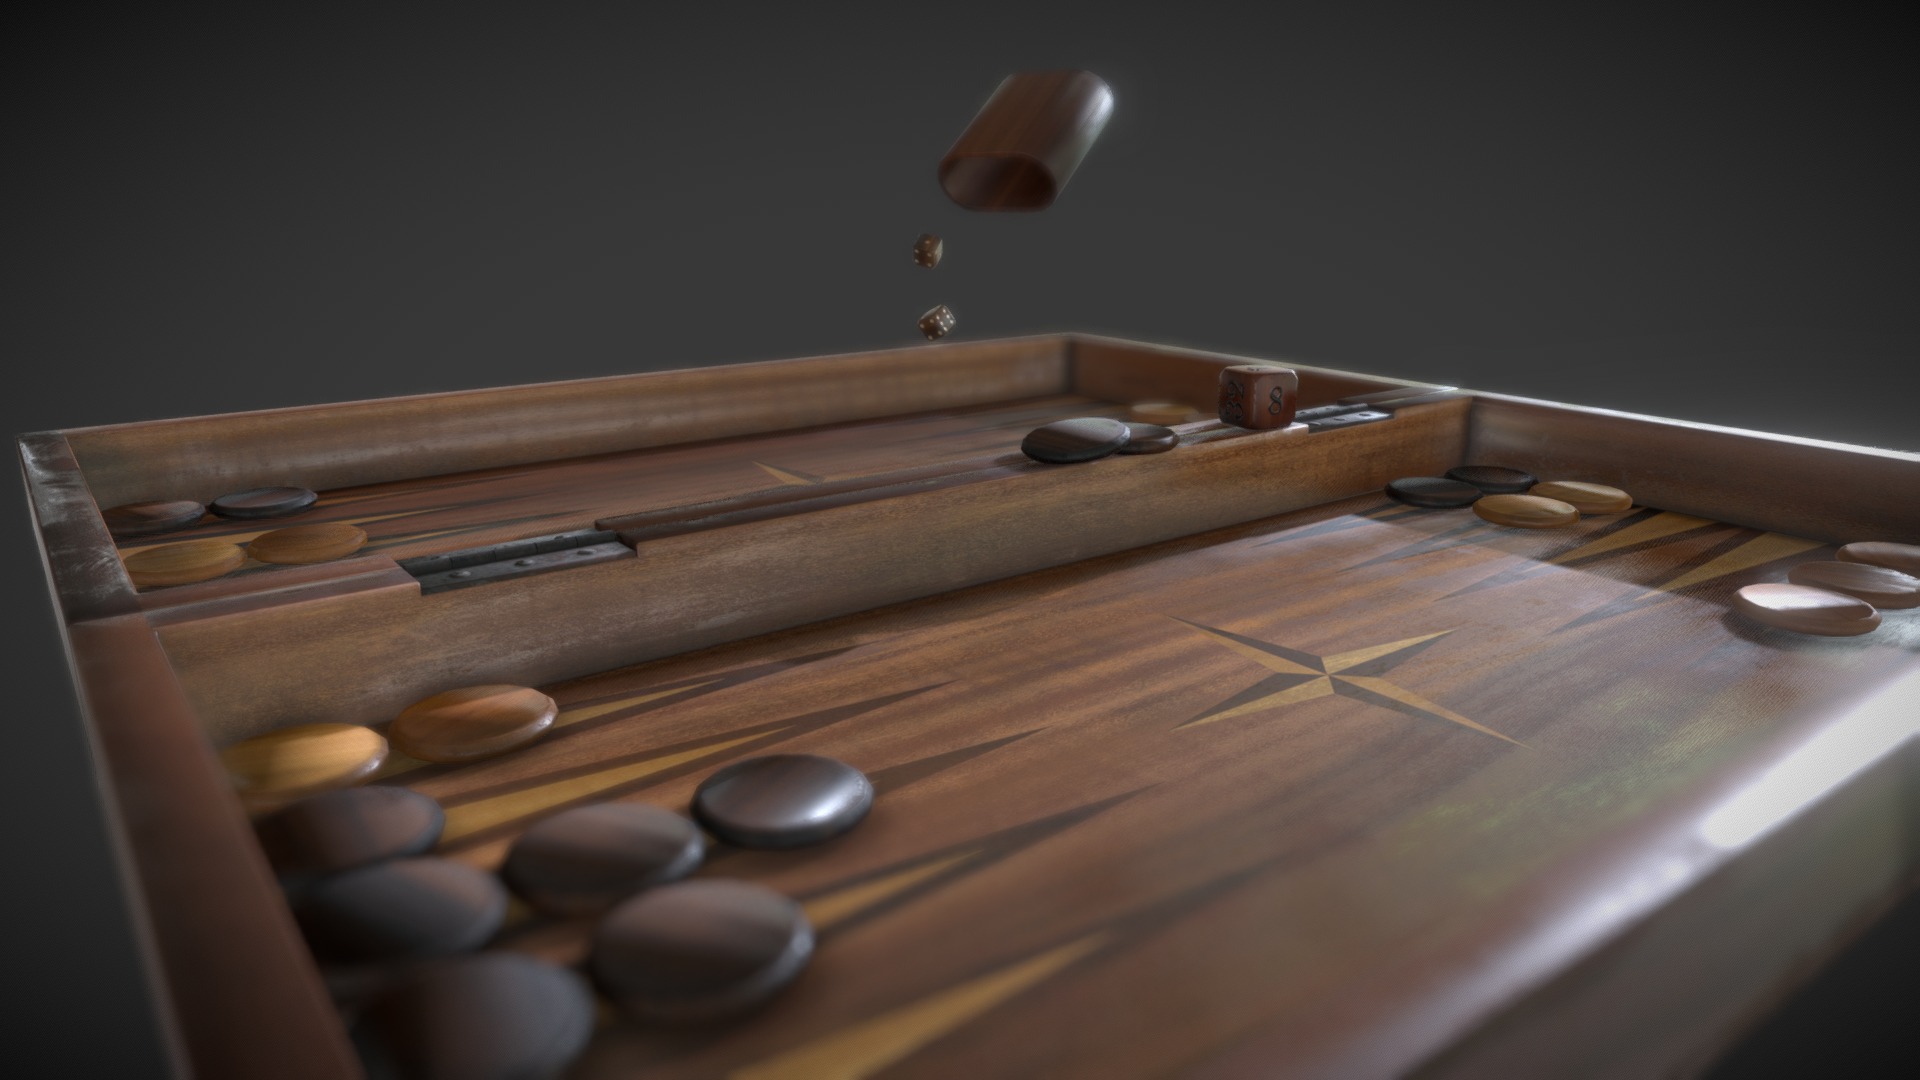 3D model Backgammon Set - This is a 3D model of the Backgammon Set. The 3D model is about a wooden board with coins on it.